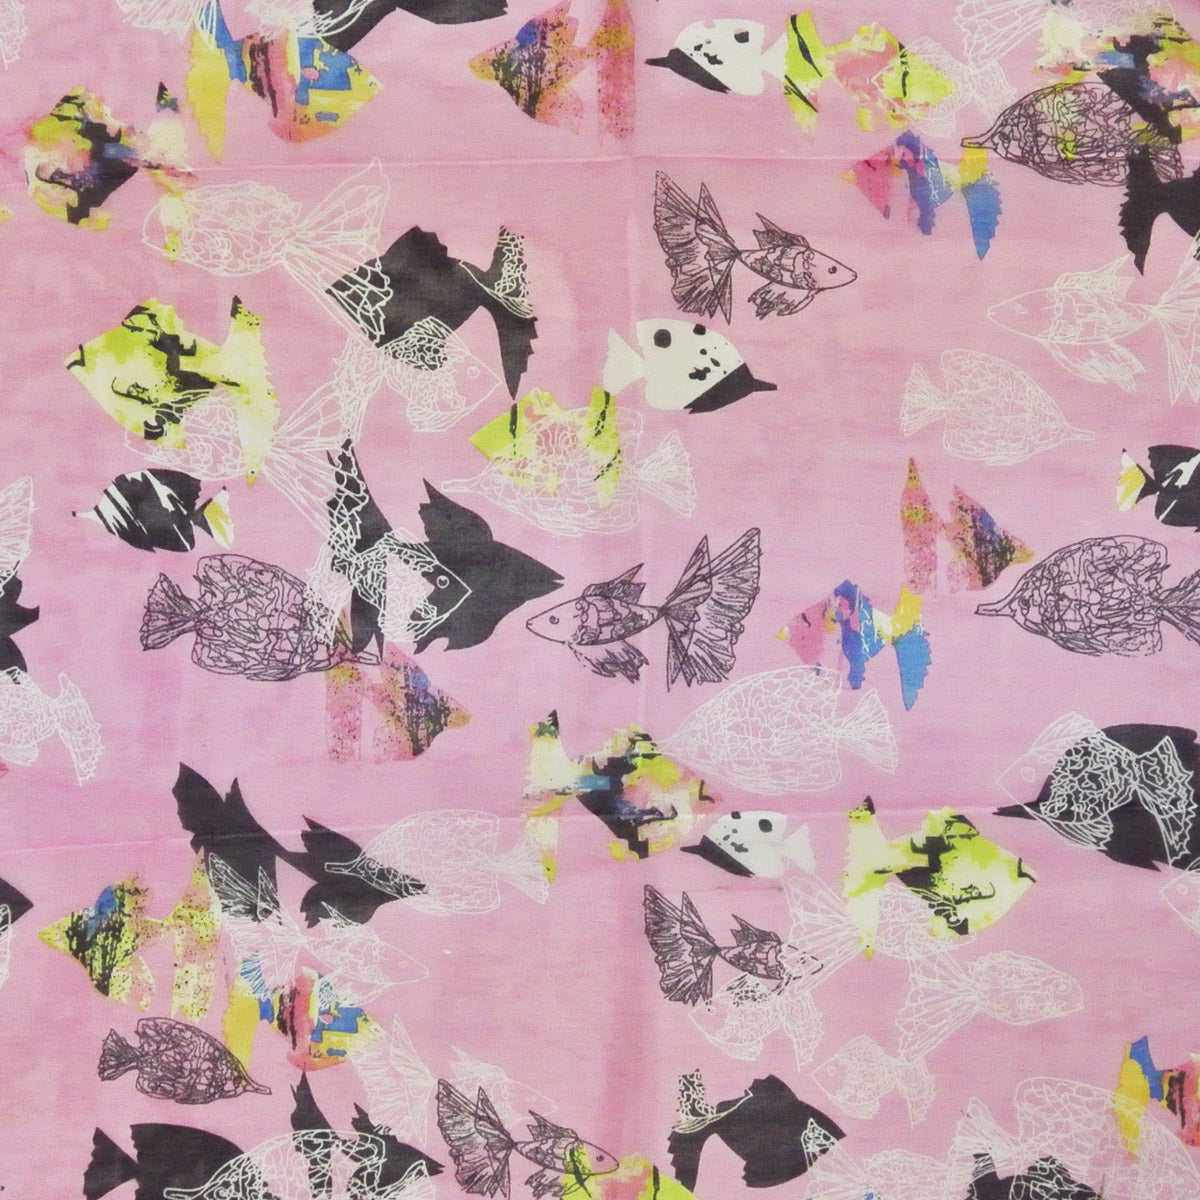 Wrapables Chiffon Under the Sea Fish Pattern Long Scarf